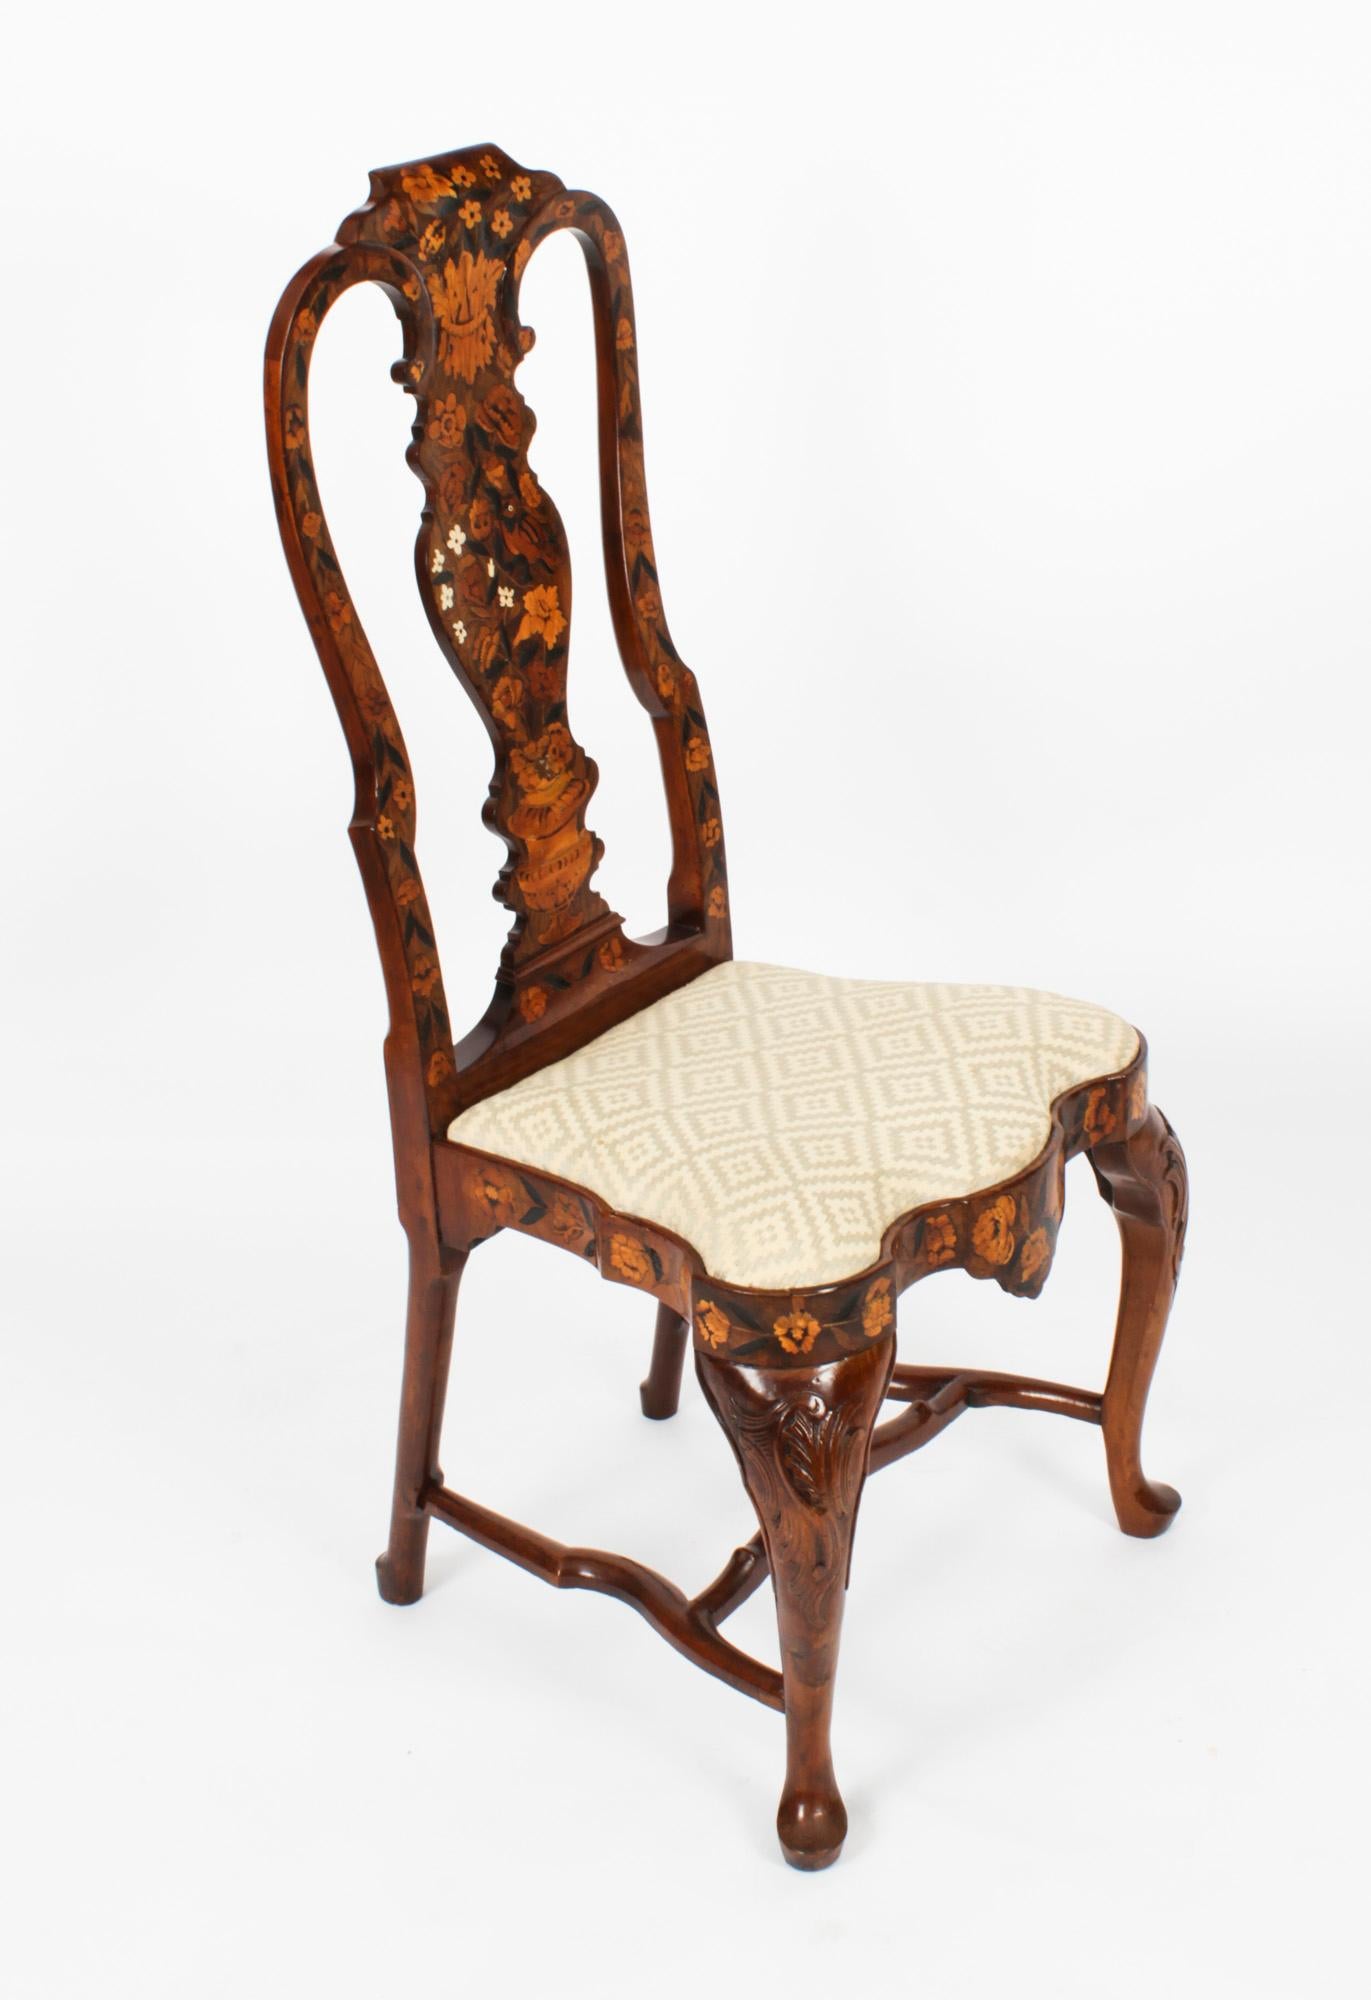 This is a wonderful and rare pair of high backed Dutch walnut and floral marquetry dining chairs, Circa 1780 in date.

The chairs have been skillfully crafted from walnut, bear profuse floral marquetry inlaid decoration and are typical of the very